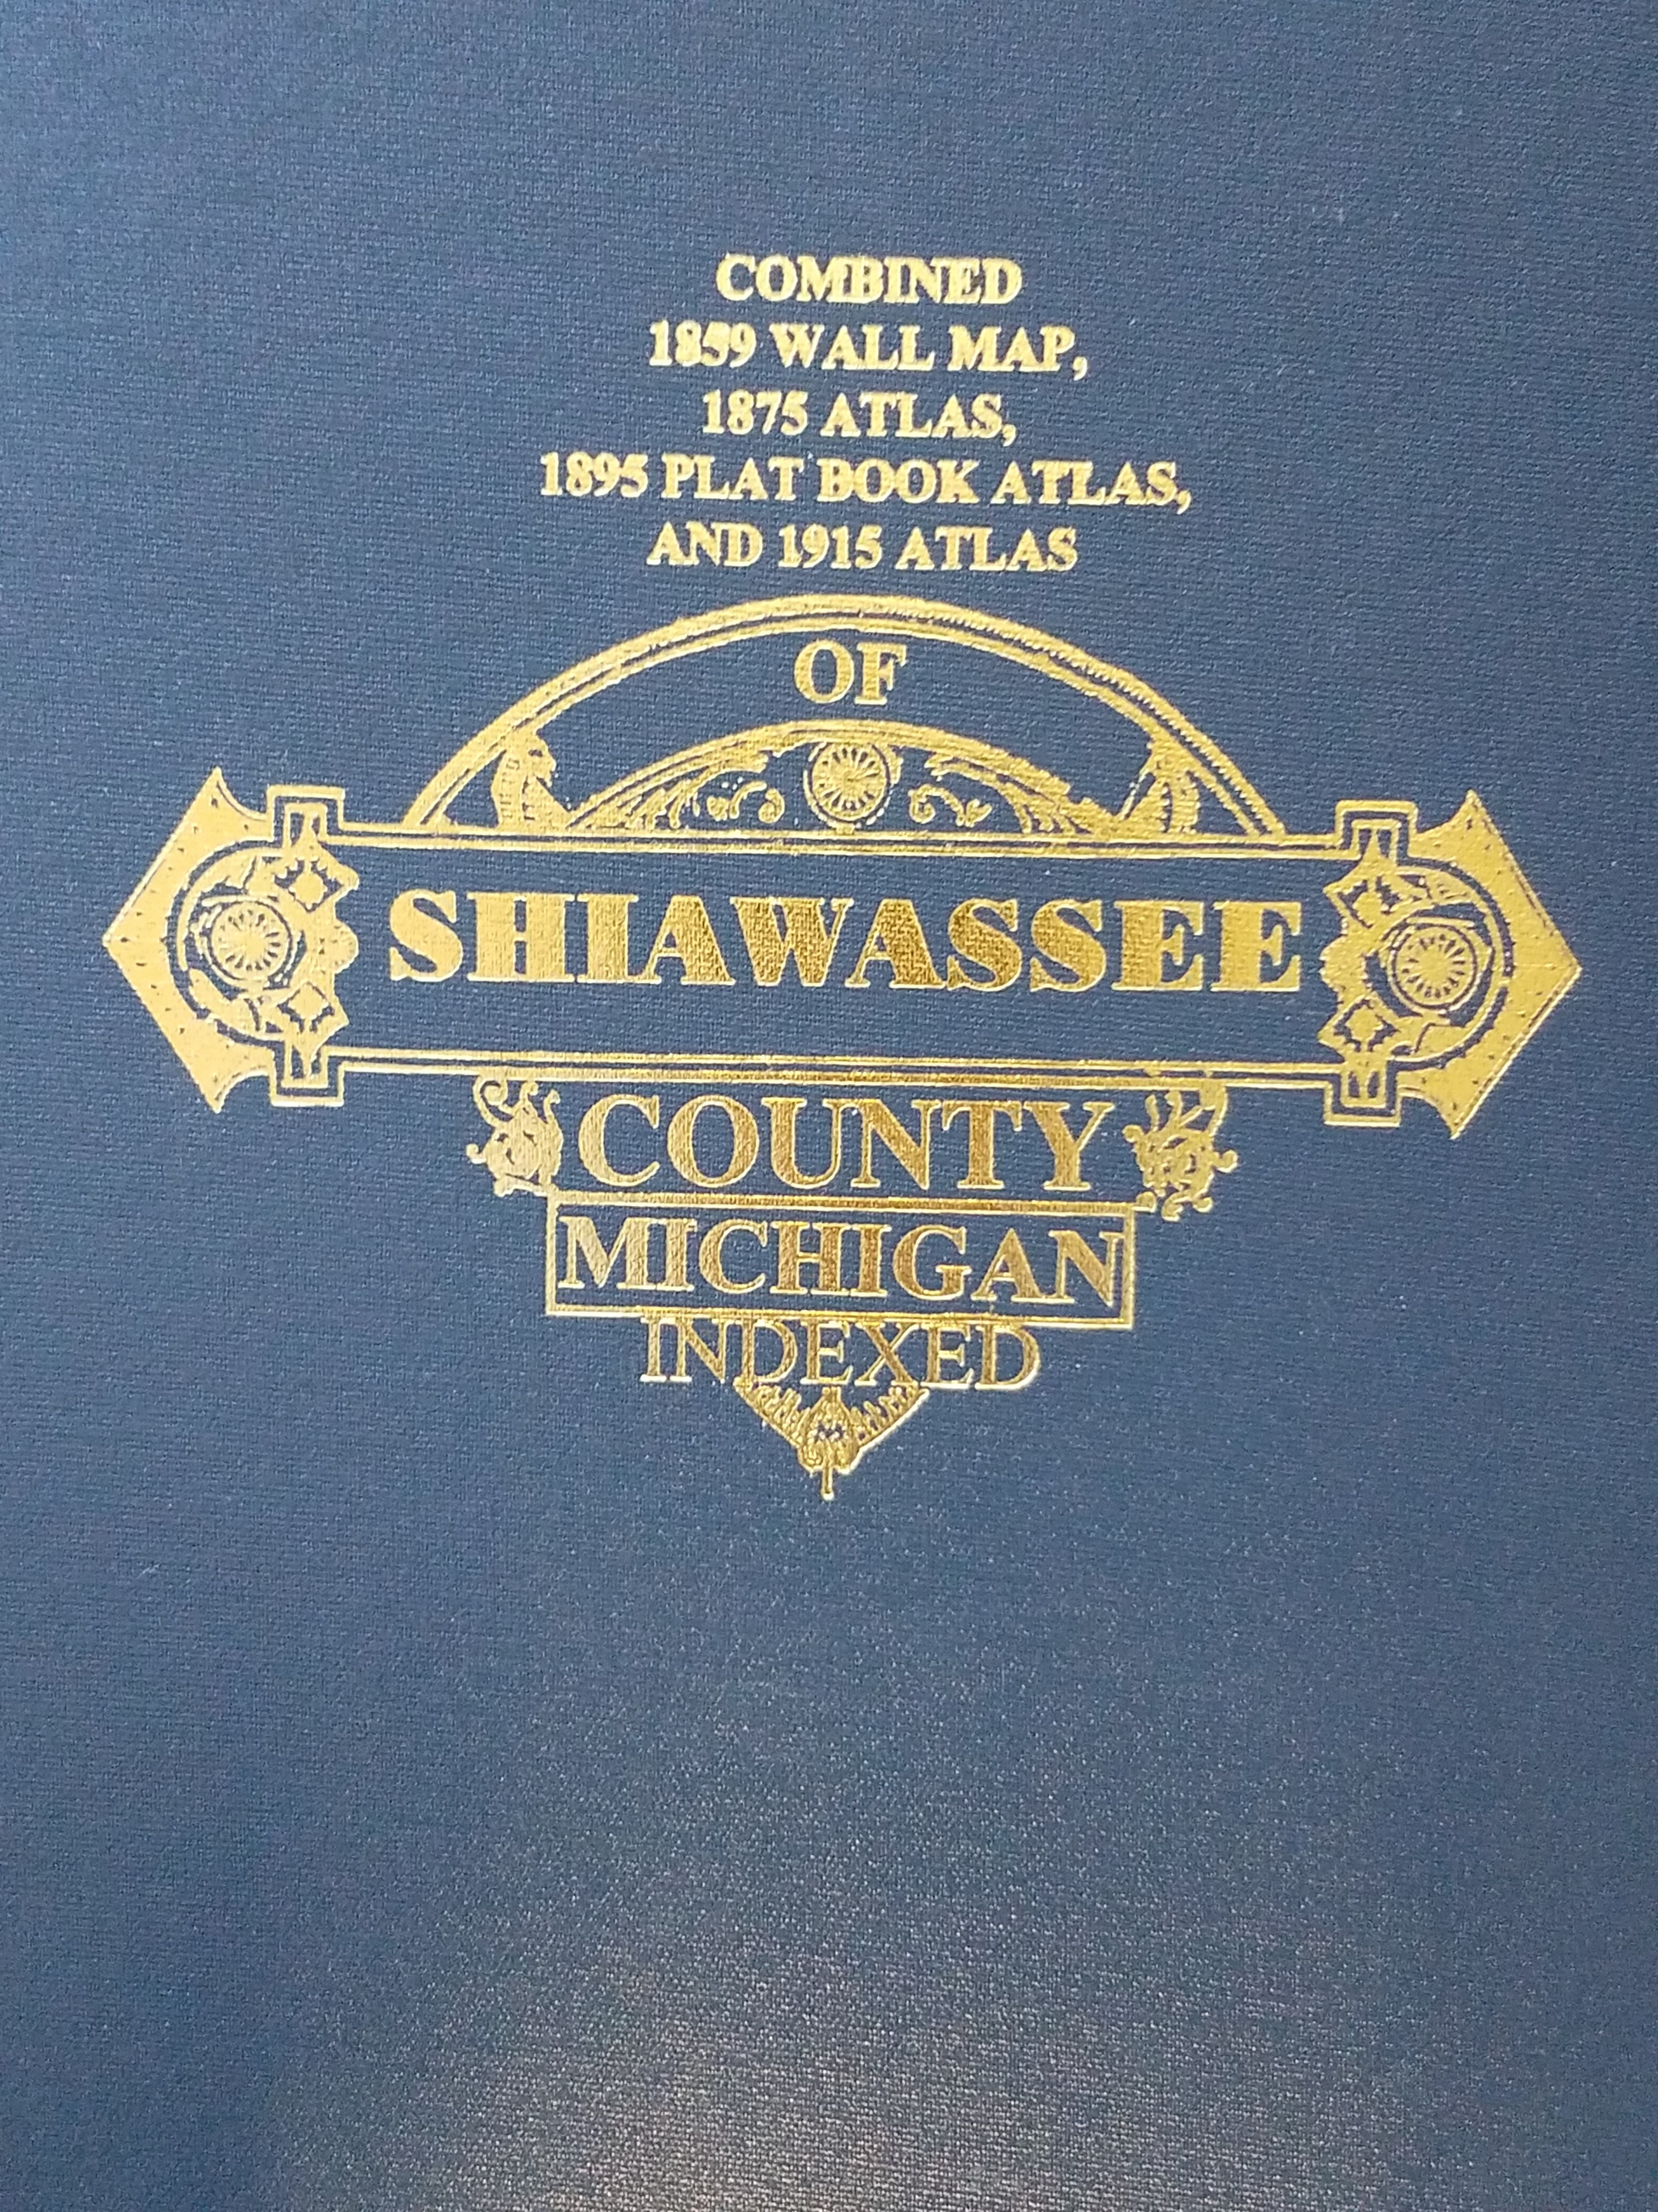 Combined 1859 Wall Map, 1875 Atlas, 1895 Plat Book Atlas, and 1915 Atlas of Shiawassee County Michigan indexed